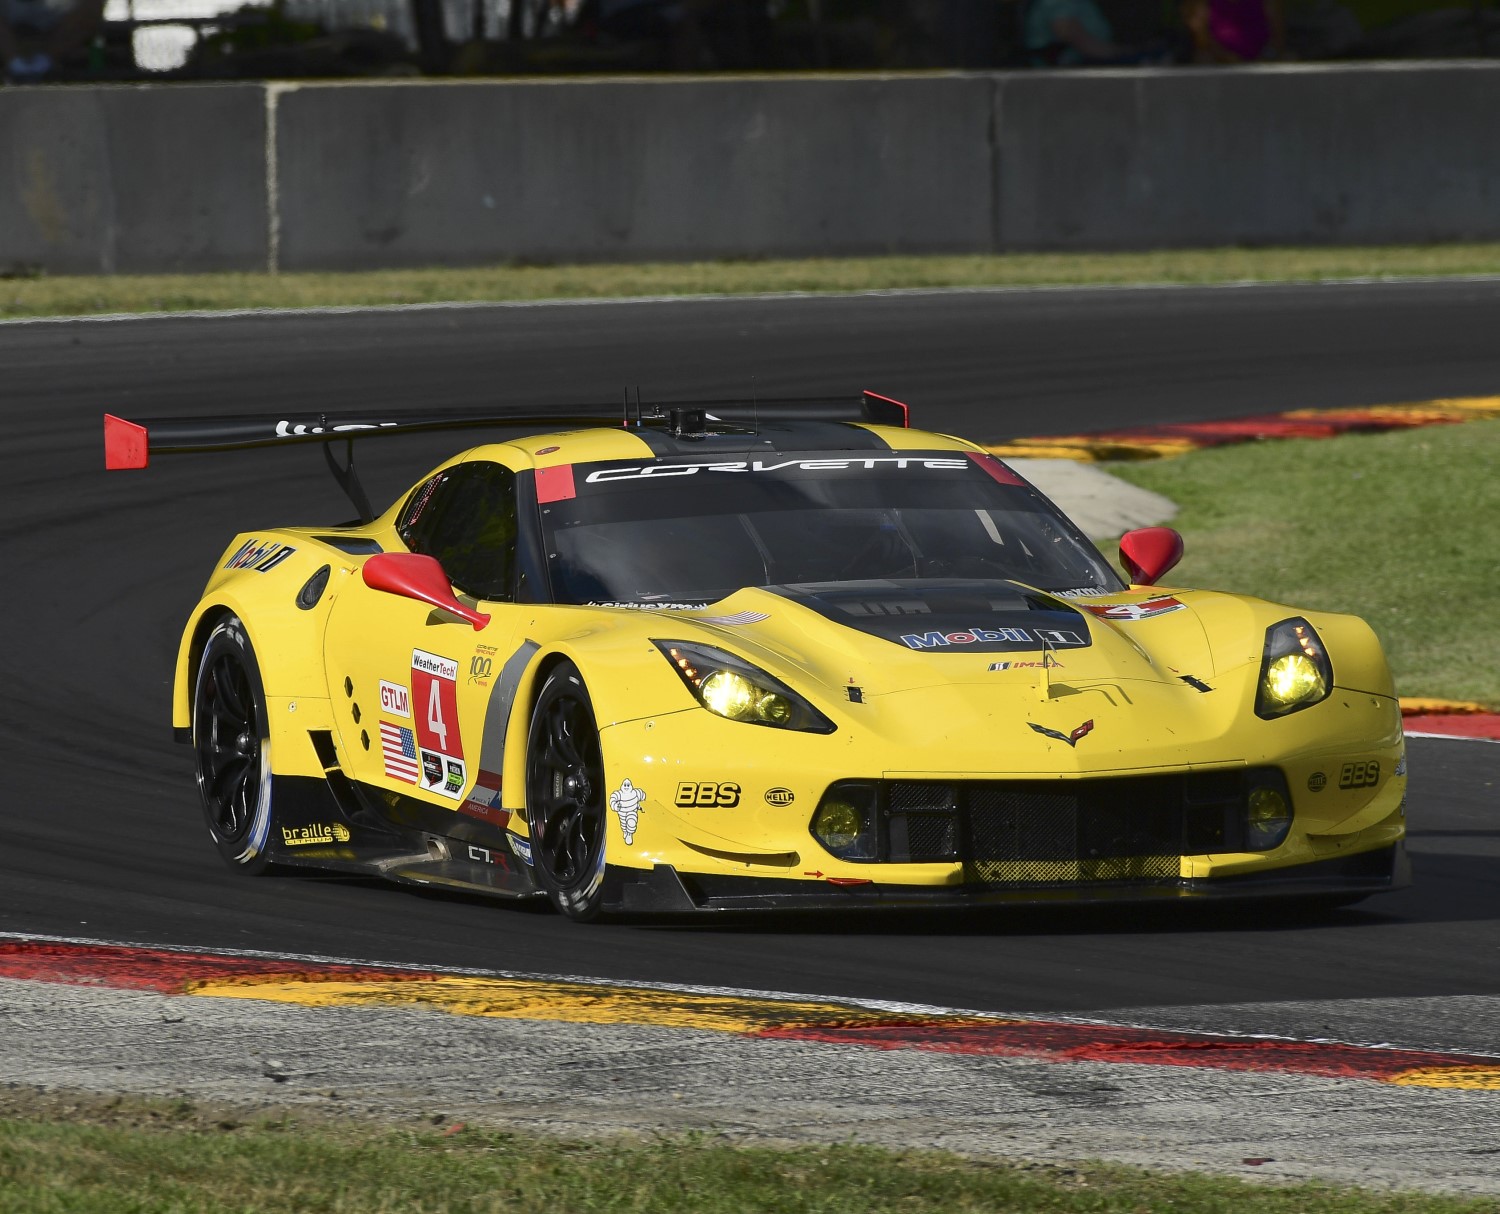 In GT class the No. 4 Corvette was victorious